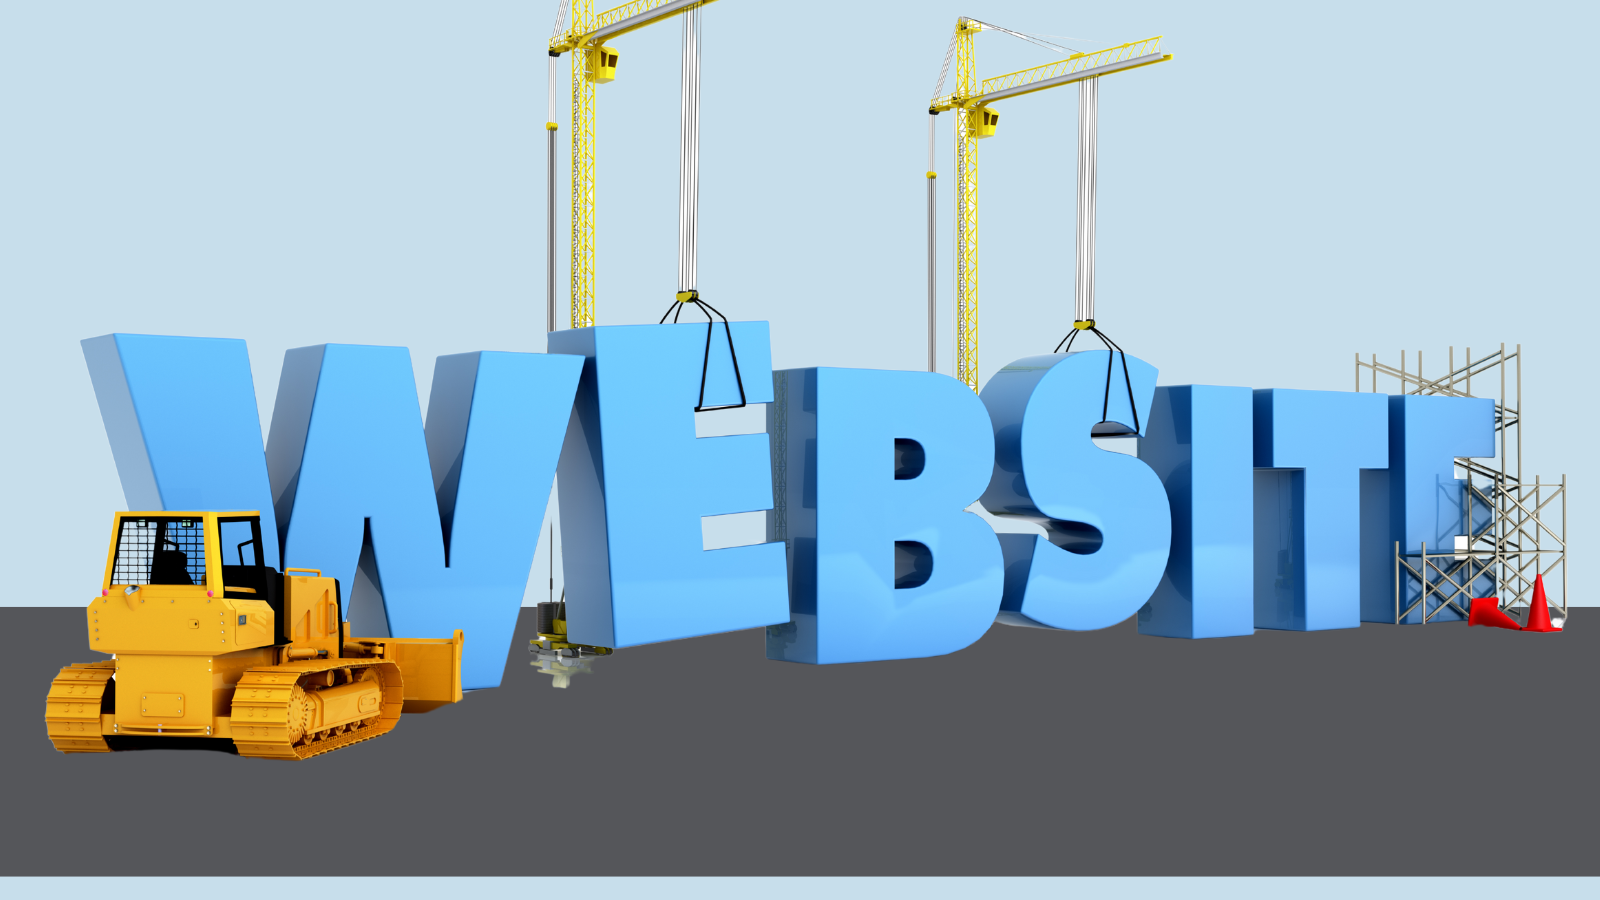 illustration of the word website with construction equipment